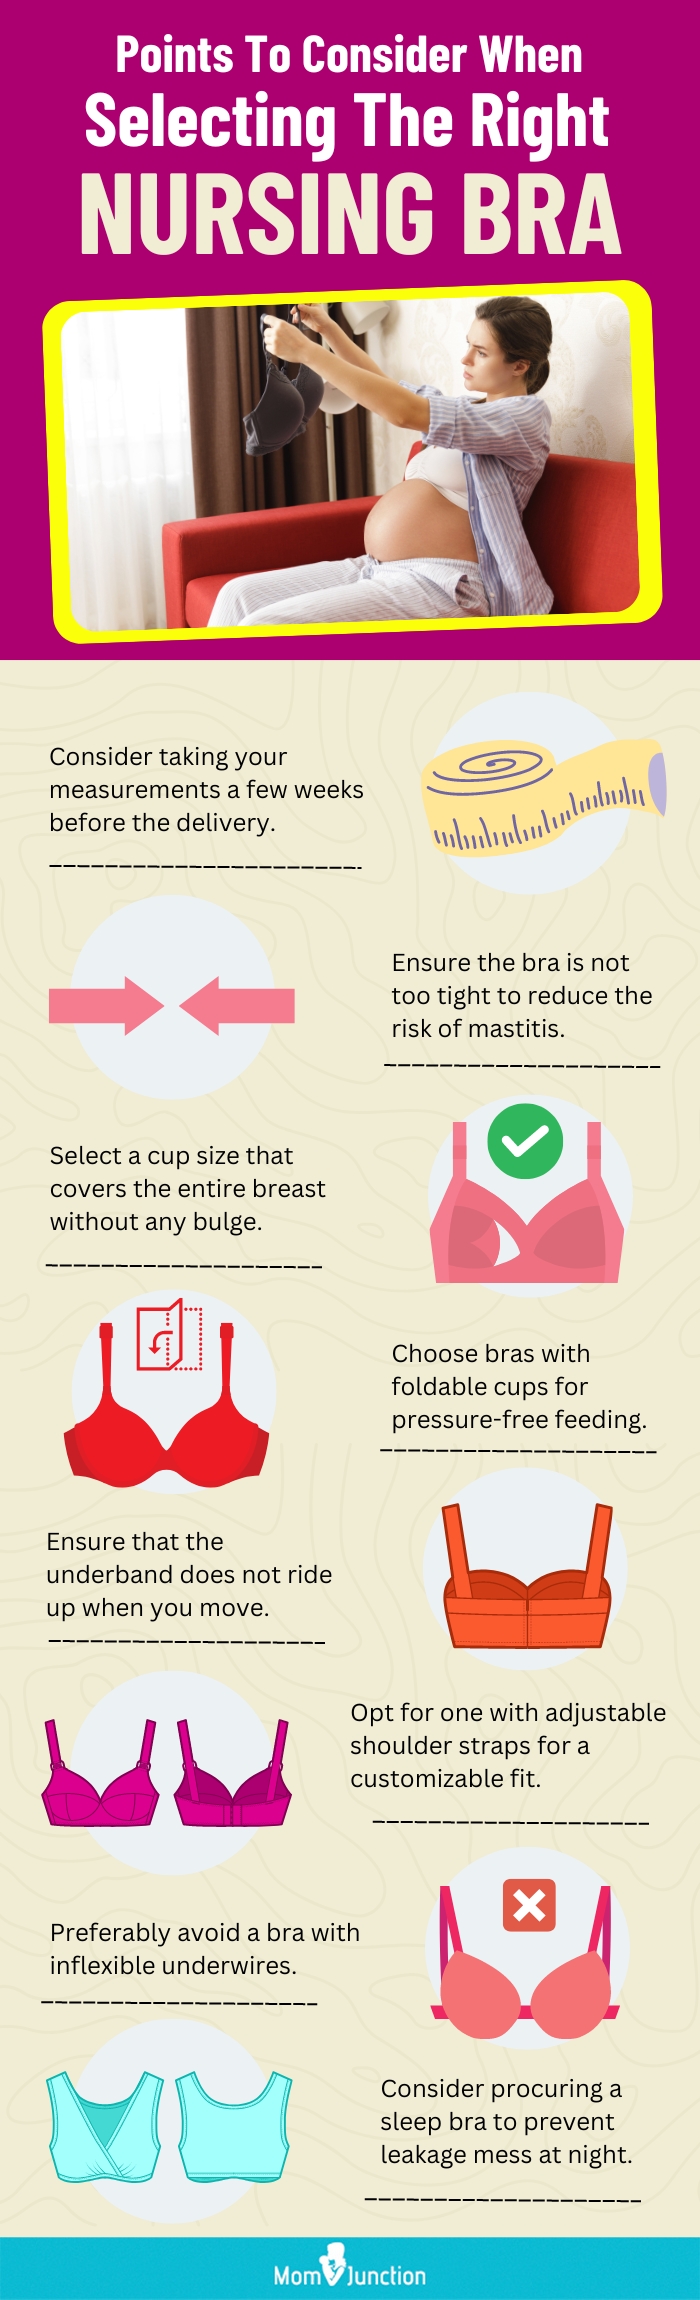 Points To Consider When Selecting The Right Nursing Bra (infographic)